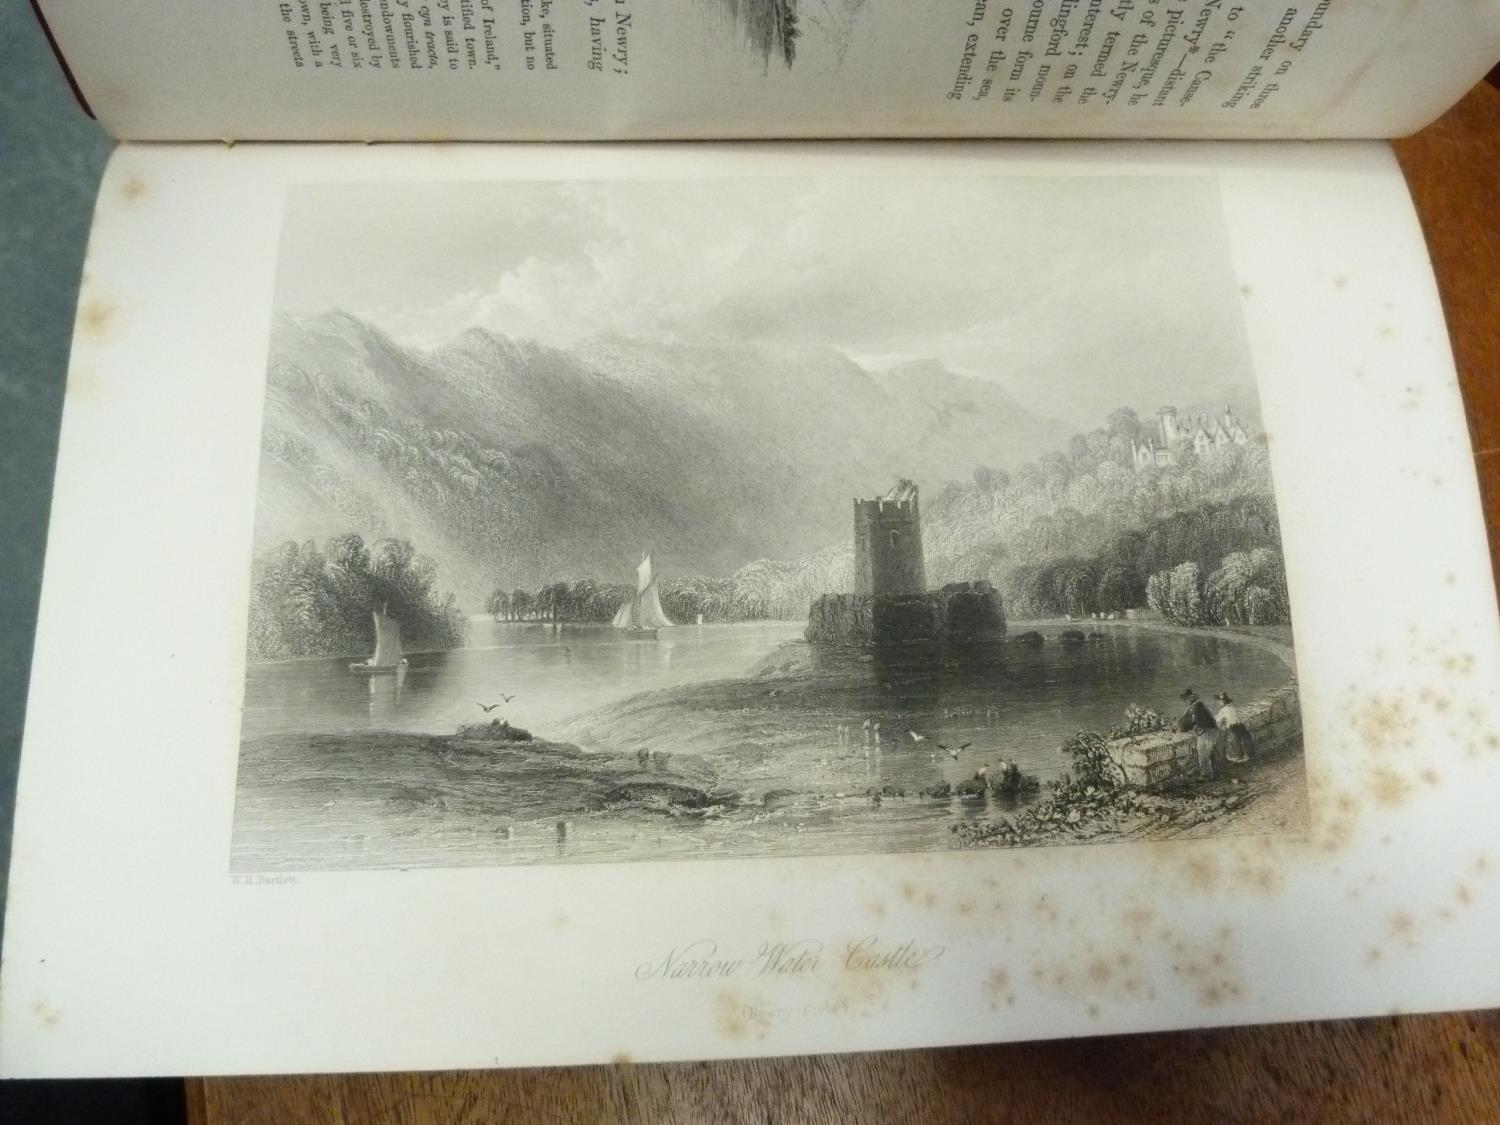 HALL MR & MRS S. C.  Ireland, Its Scenery, Character, etc. 3 vols. Many eng. plates, text illus. & - Image 2 of 3